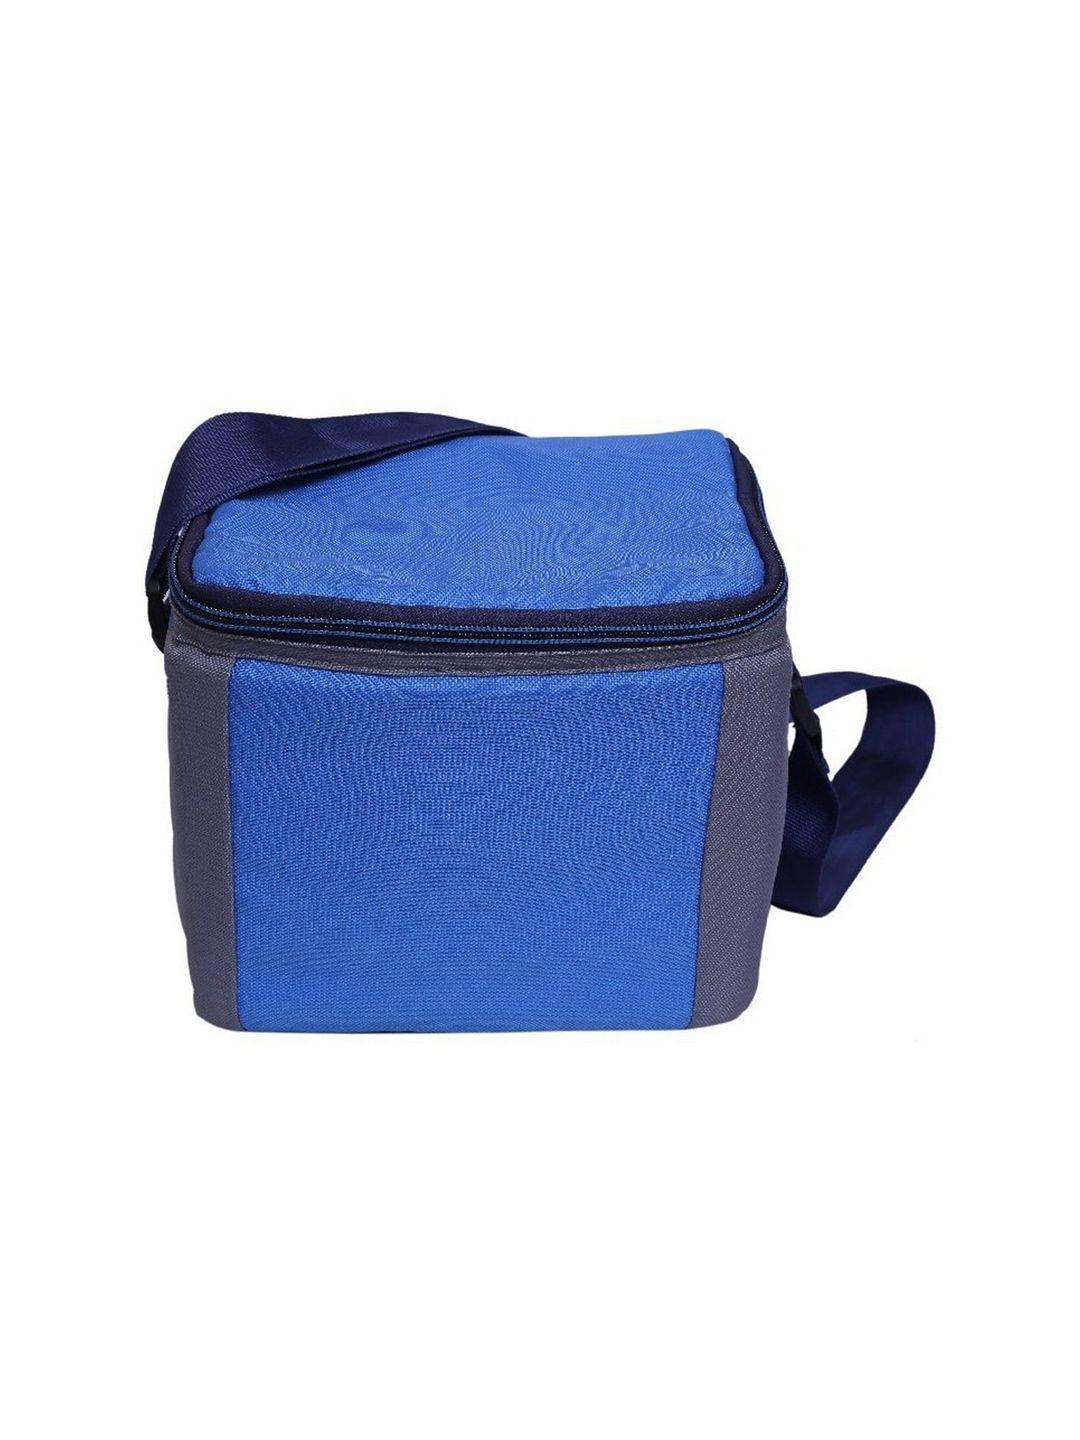 bags.r.us royal blue insulated polyester chiller lunch bag with free ice pack